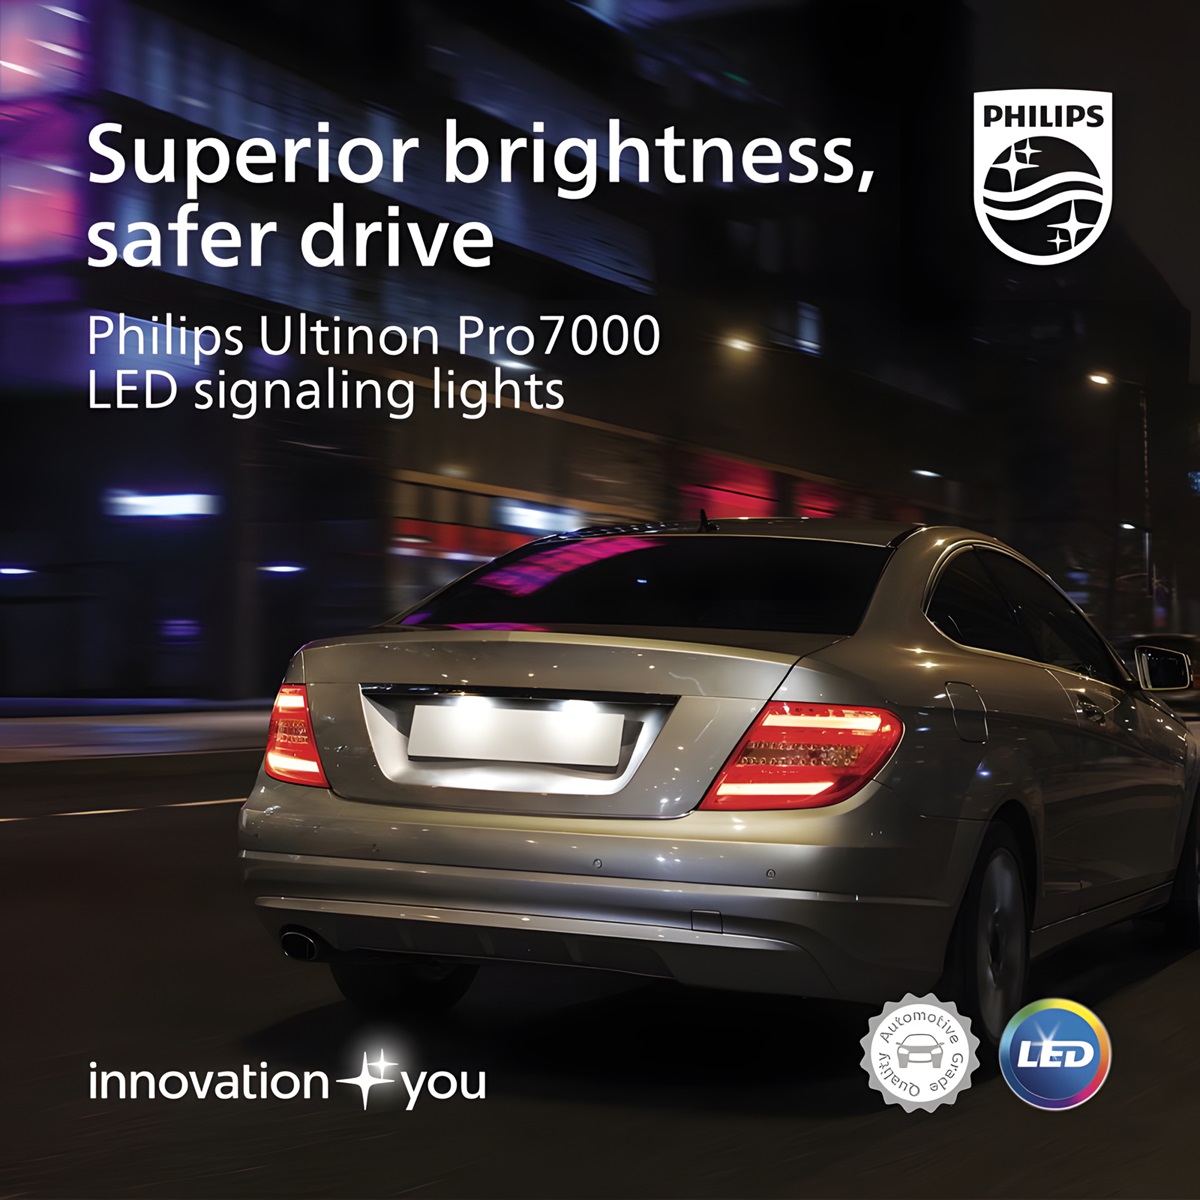 New Philips Ultinon Pro7000 LED Signaling Bulbs Offer Superior Brightness for Safer Driving